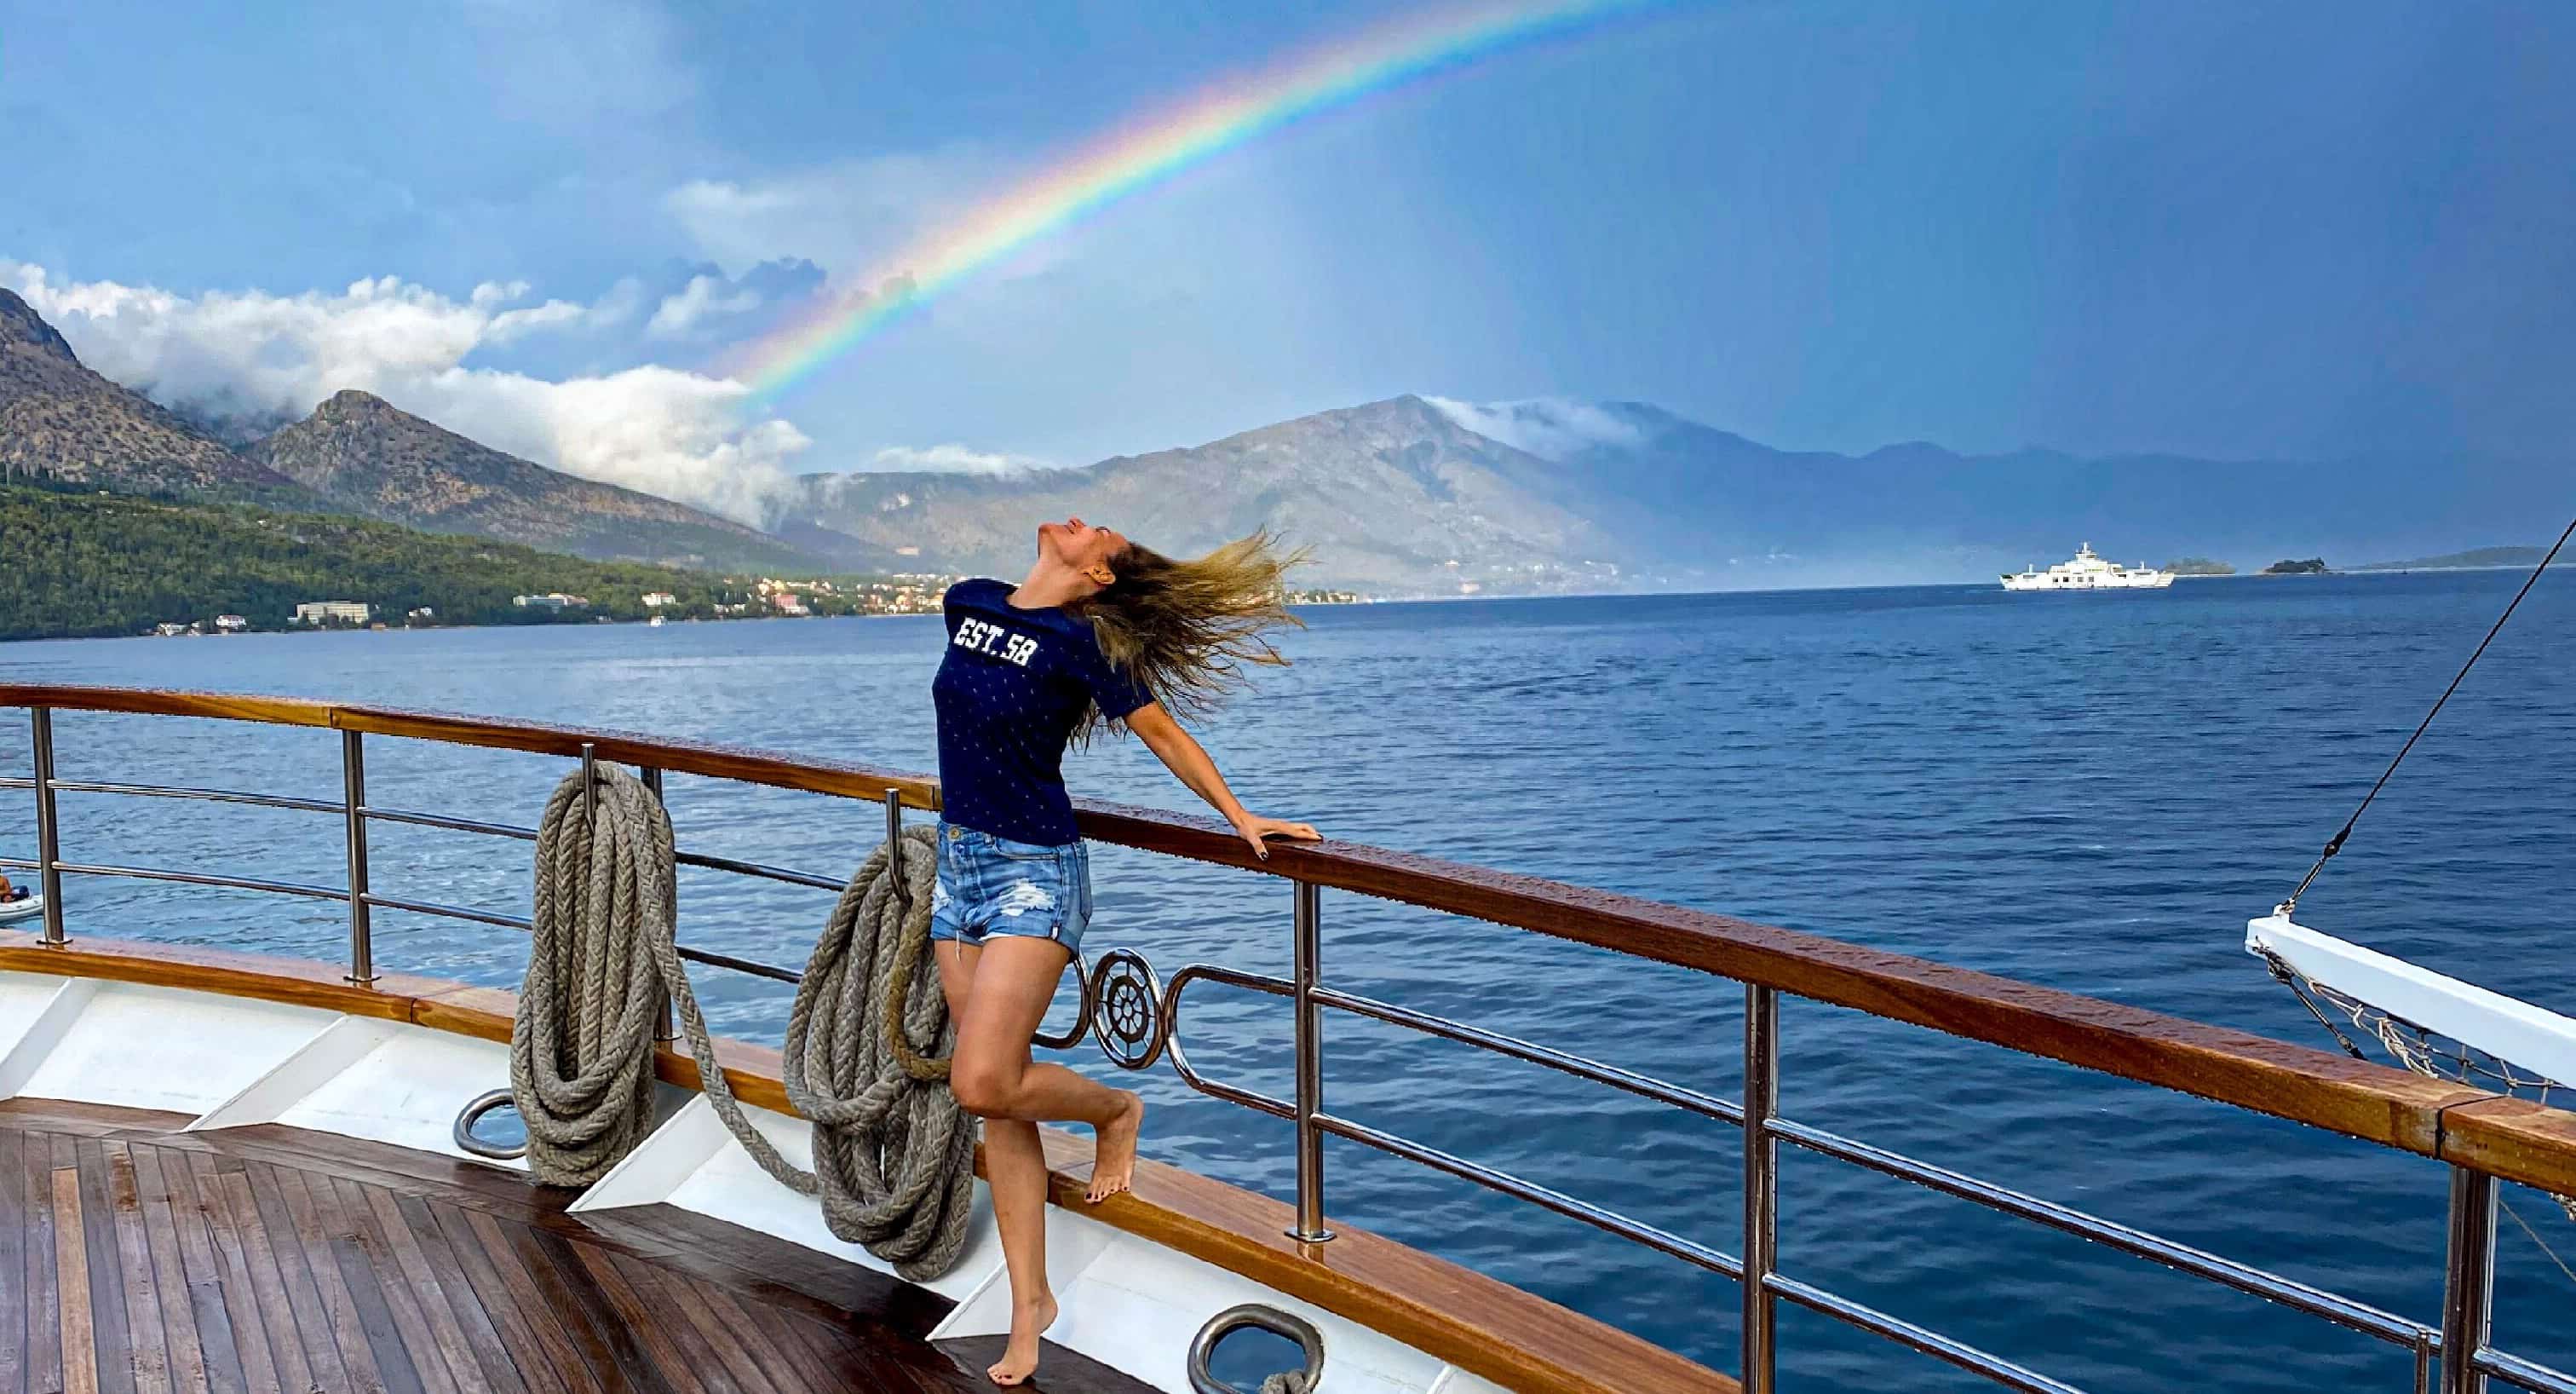 Under the rainbow onboard Melody